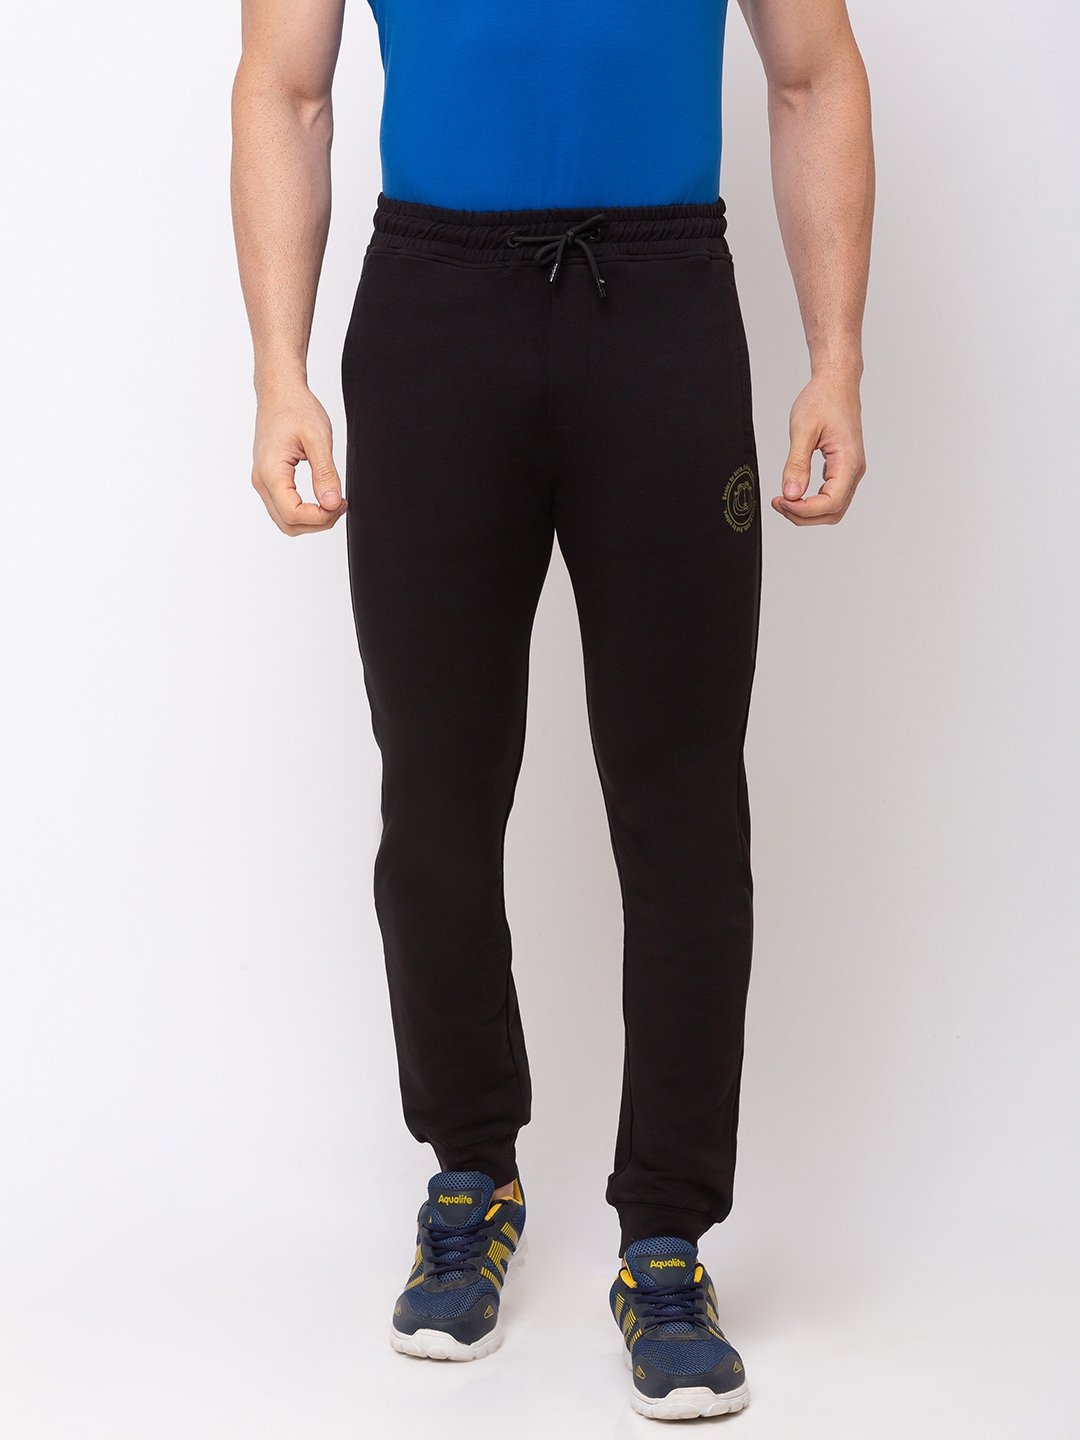 Status Quo | Black Printed Joggers with HD Branding